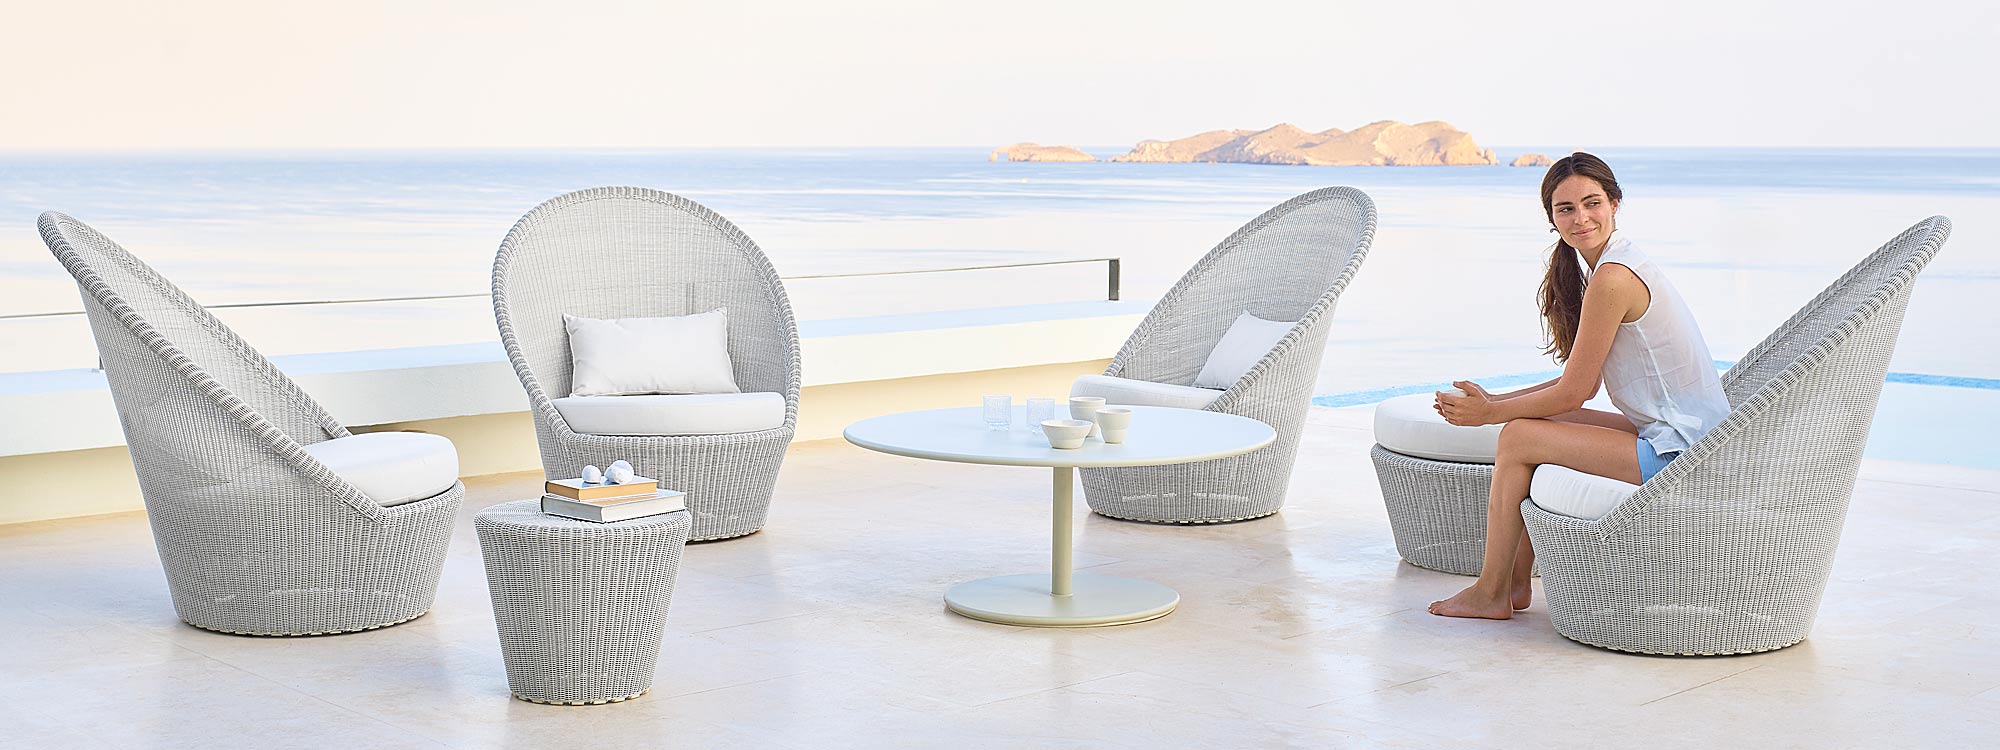 Image of white-grey Kingston high backed garden chairs by Caneline on terrace with sea and an island in the background